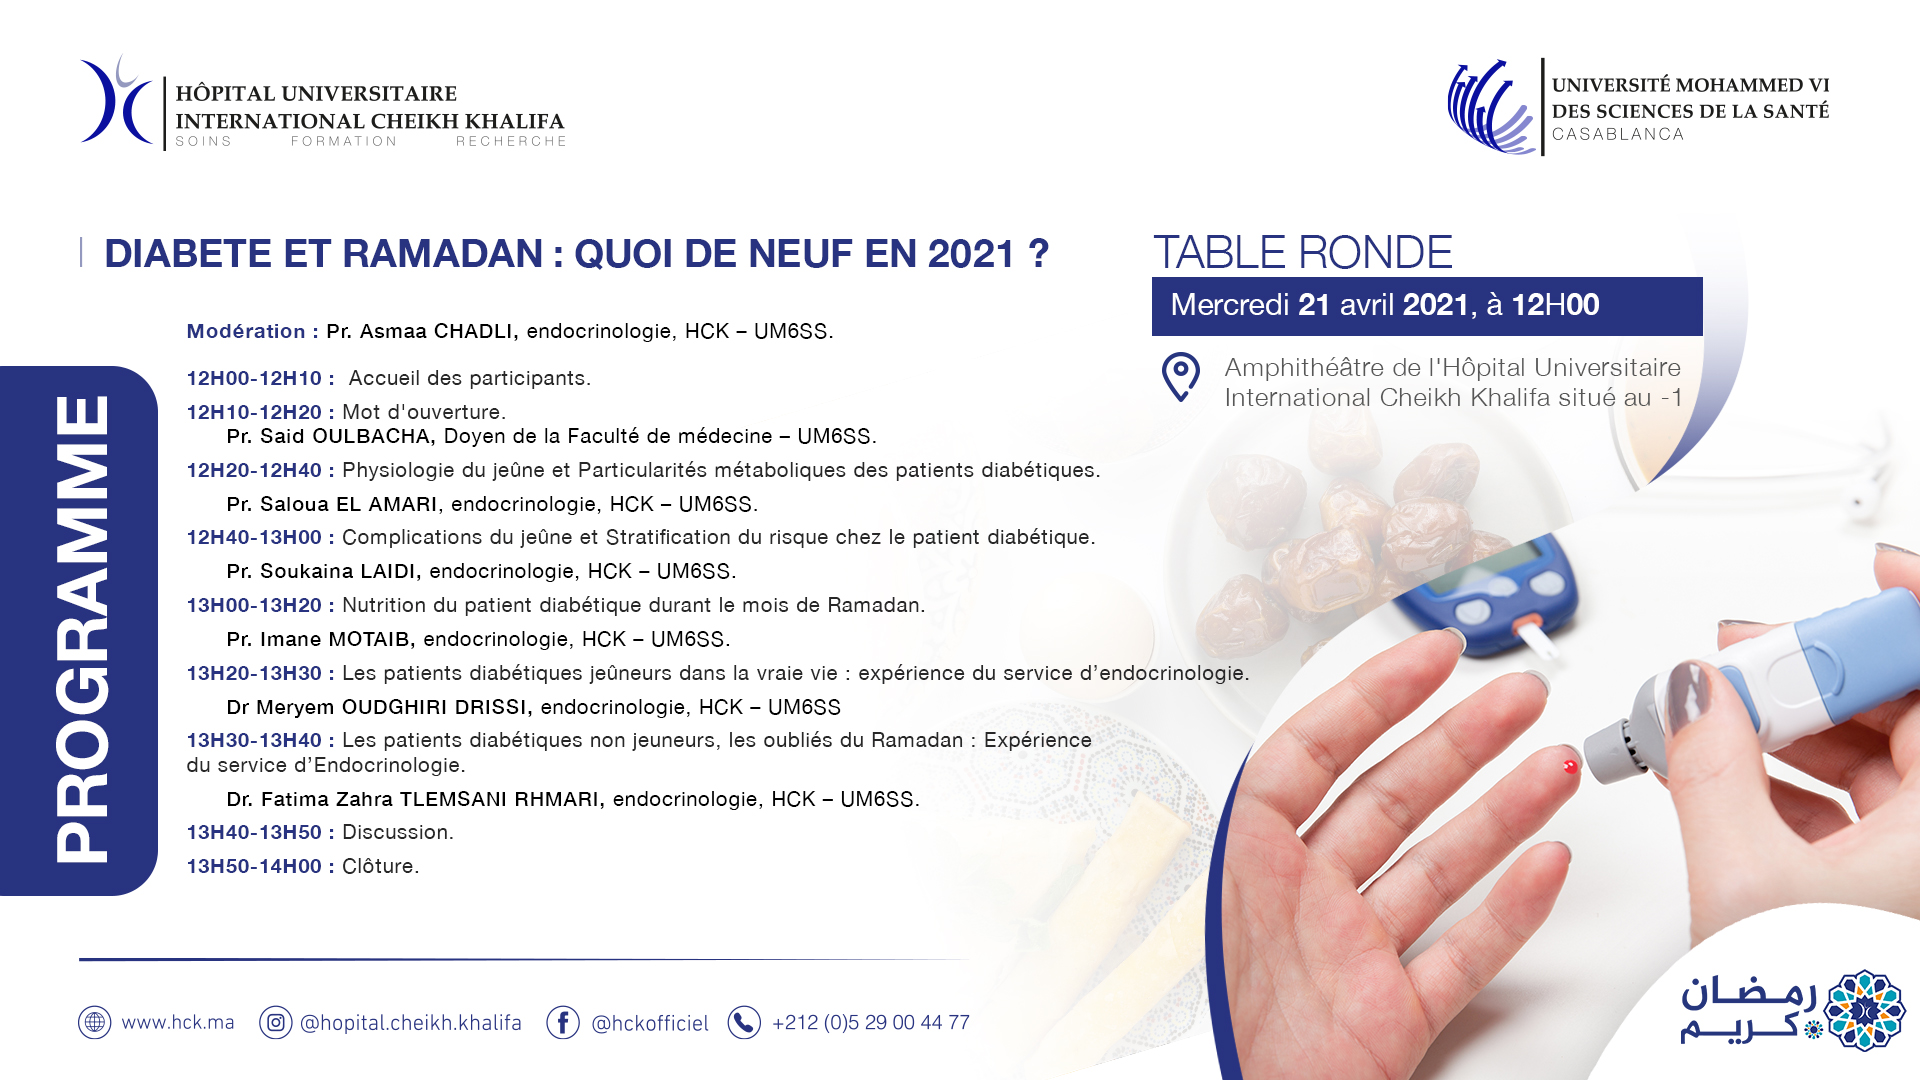 /Programme-_TABLE_RONDE_-_21_avril_2021_-_1920x1080px